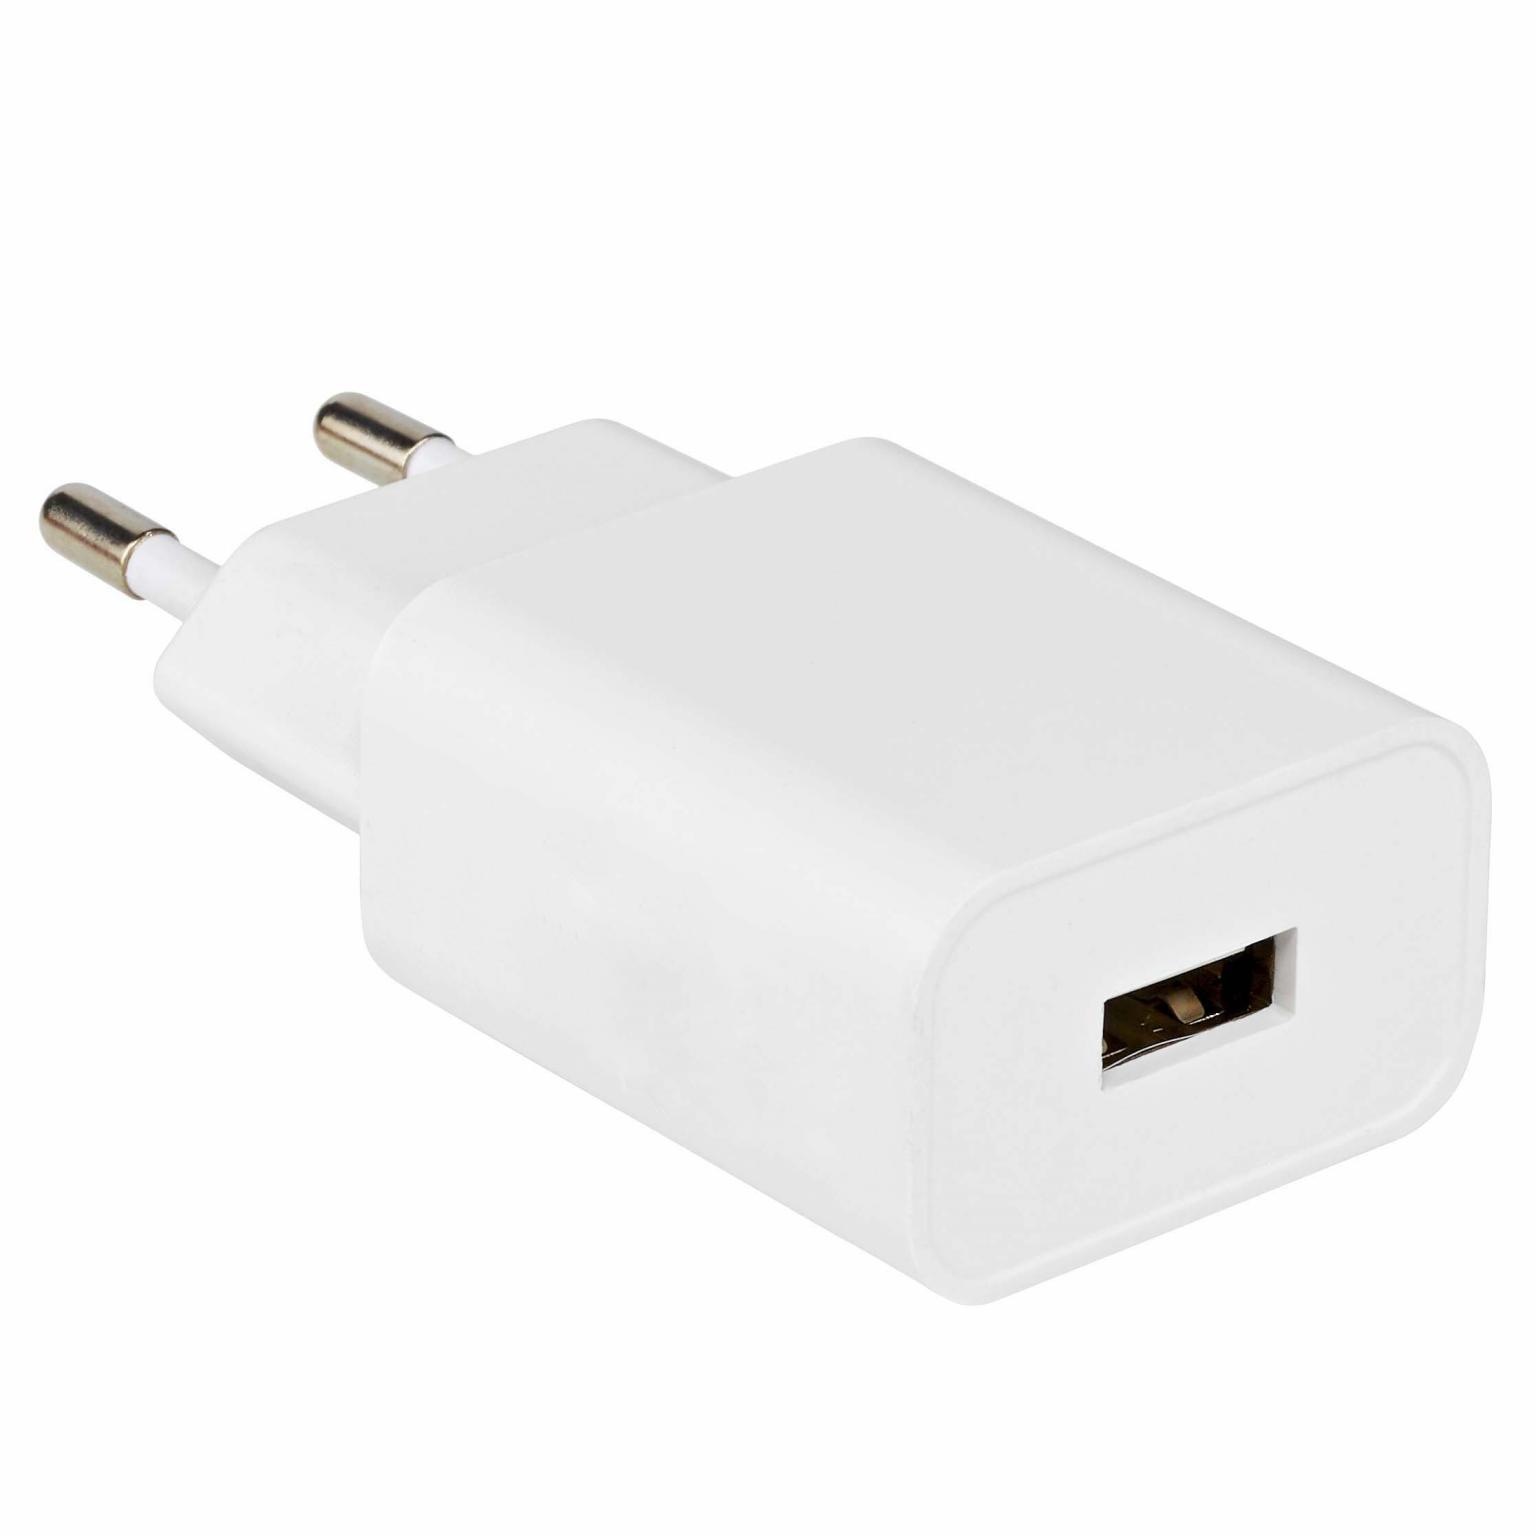 IPhone 8 - USB lader - Allteq